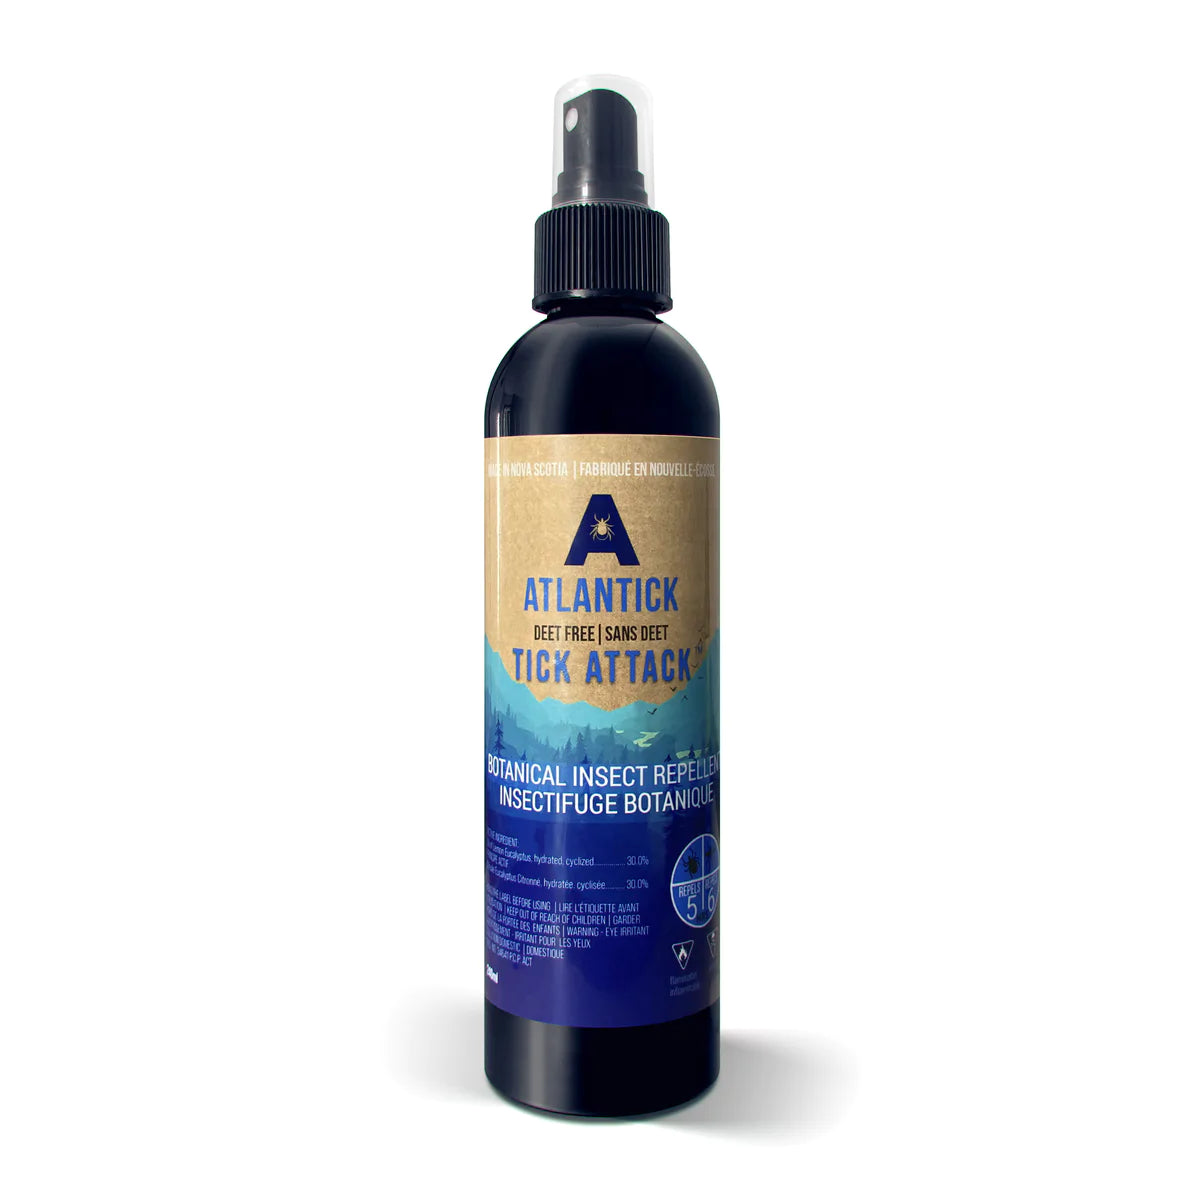 Tick Attack™ Botanical Insect Repellent 60ml - Natural Outdoor Spray